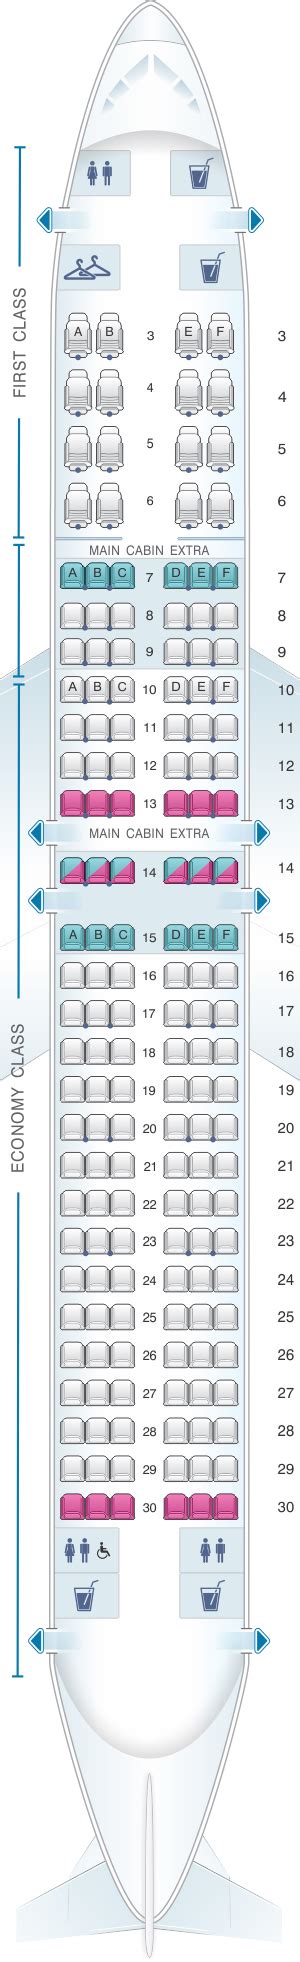 American airlines boeing 737-800 seating chart. Seats 144. Pitch 30-32". Width 17.5". Recline 3". Passengers flying with SCAT Airlines on their Boeing 737-300 can expect a straightforward experience in economy class. Designed for 144 travelers, the cabin balances affordability with essential comforts. While the seating is functional, passengers can enjoy a selection of in-flight entertainment. 